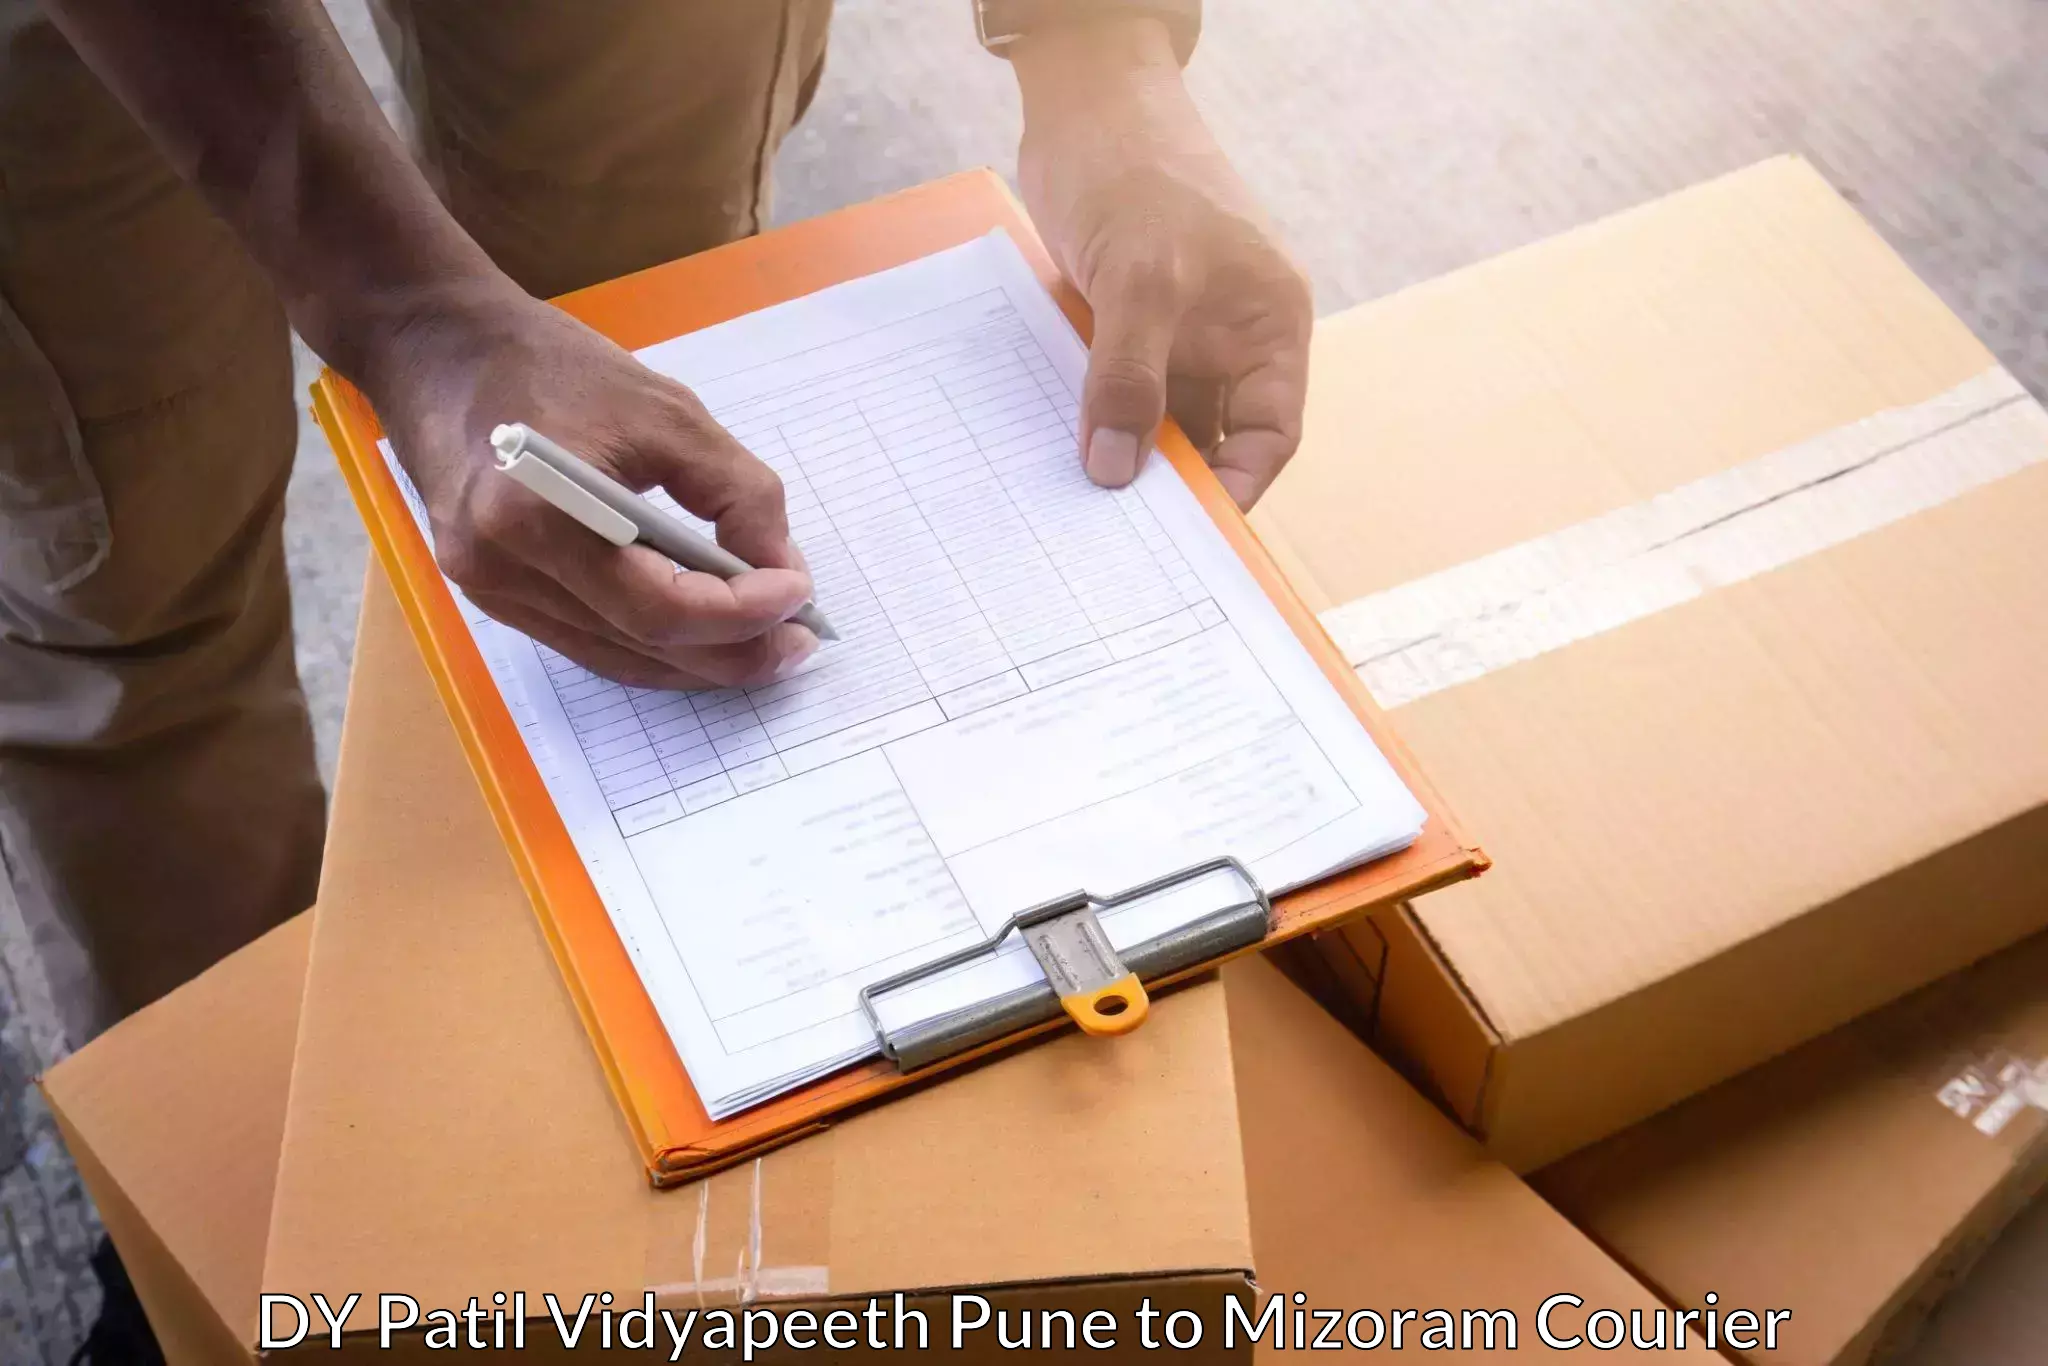 Customer-focused courier DY Patil Vidyapeeth Pune to Hnahthial